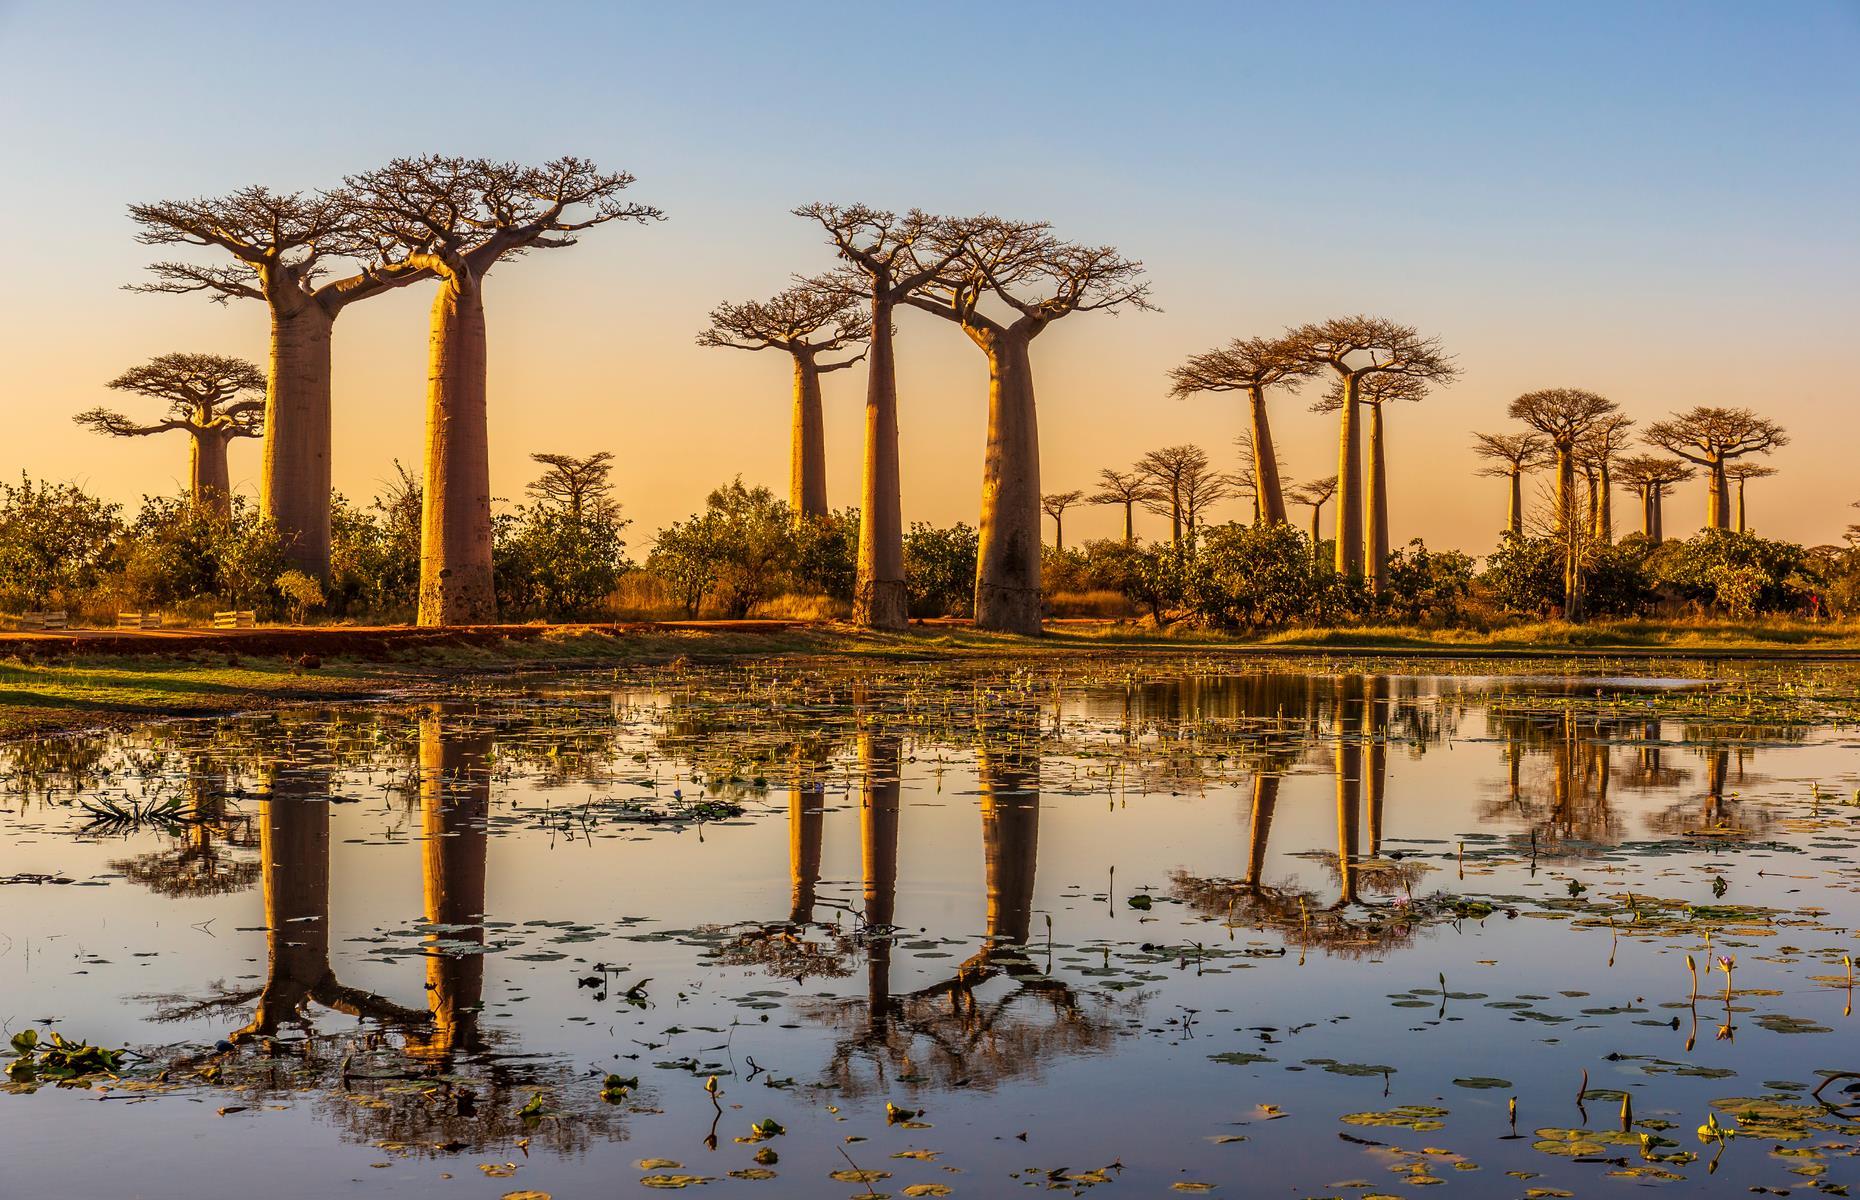 This row of fat-bottomed baobab trees is as bizarre and beguiling as the island’s tangerine-eyed lemurs, and probably just as frequently photographed. The Avenue of the Baobabs, on a dirt road between Morondava and Belon'i Tsiribihina in western Madagascar, is made up of majestic centuries-old trees, reaching up to 100-feet (30m) tall.